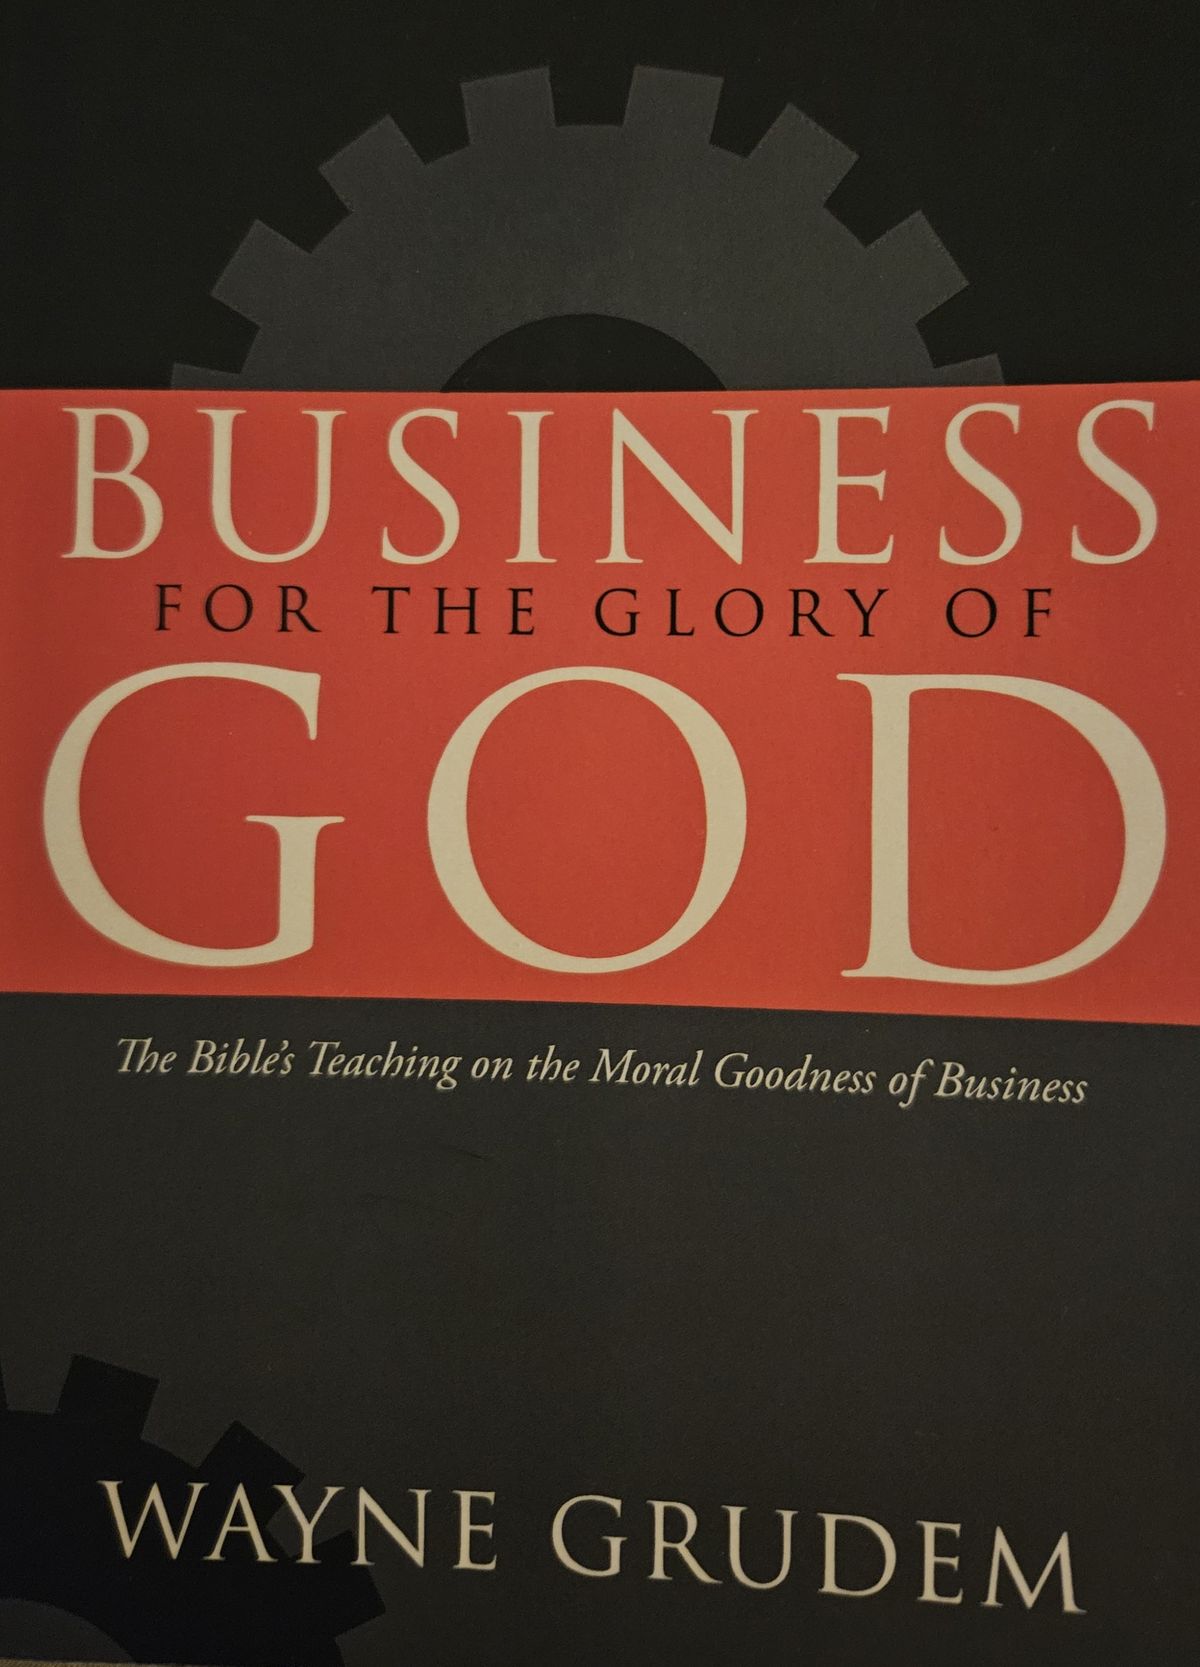 Resource Spotlight: Wayne Grudem, Business for the Glory of God: The Bible's Teaching on The Moral Goodness of Business